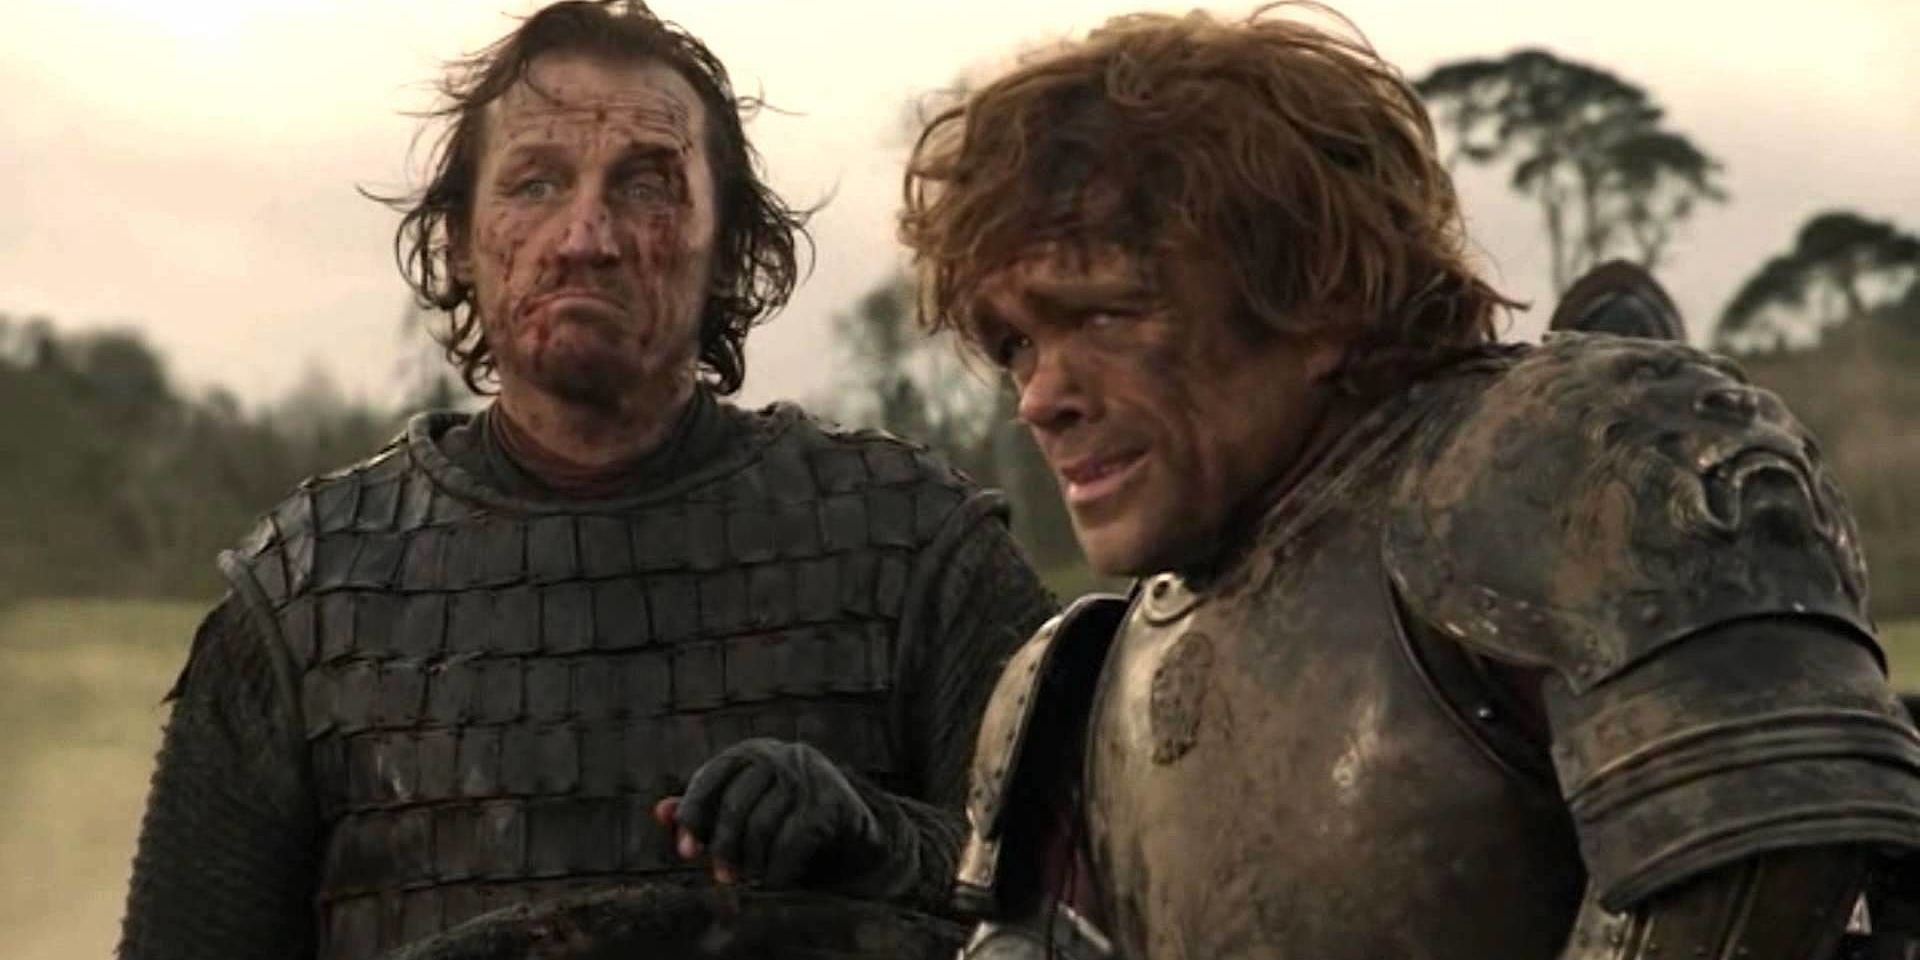 Tyrion and Bronn looking muddy after the Battle of the Riverlands